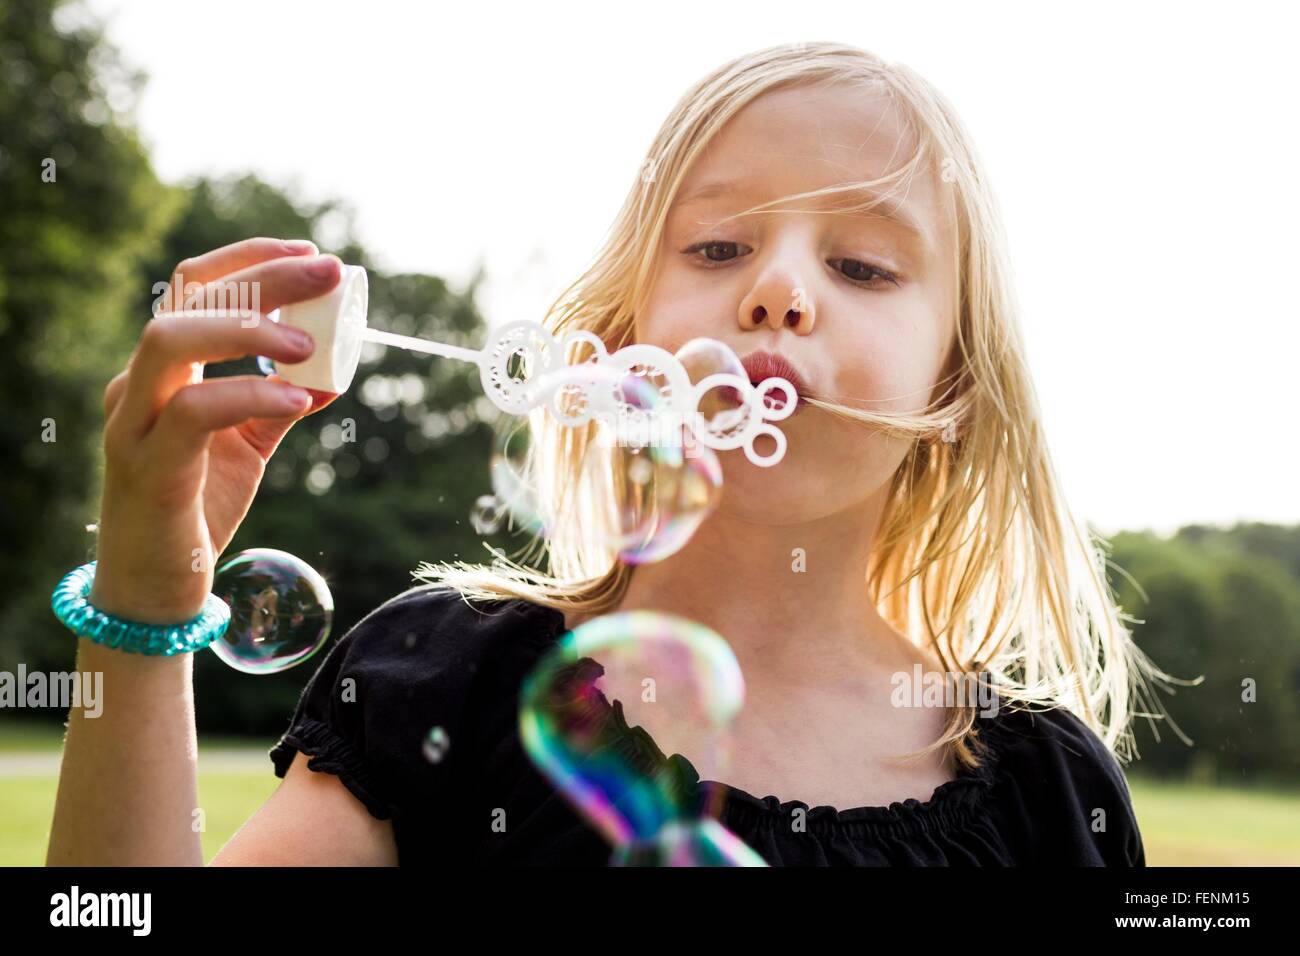 Portrait of cute girl blowing bubbles in park Stock Photo